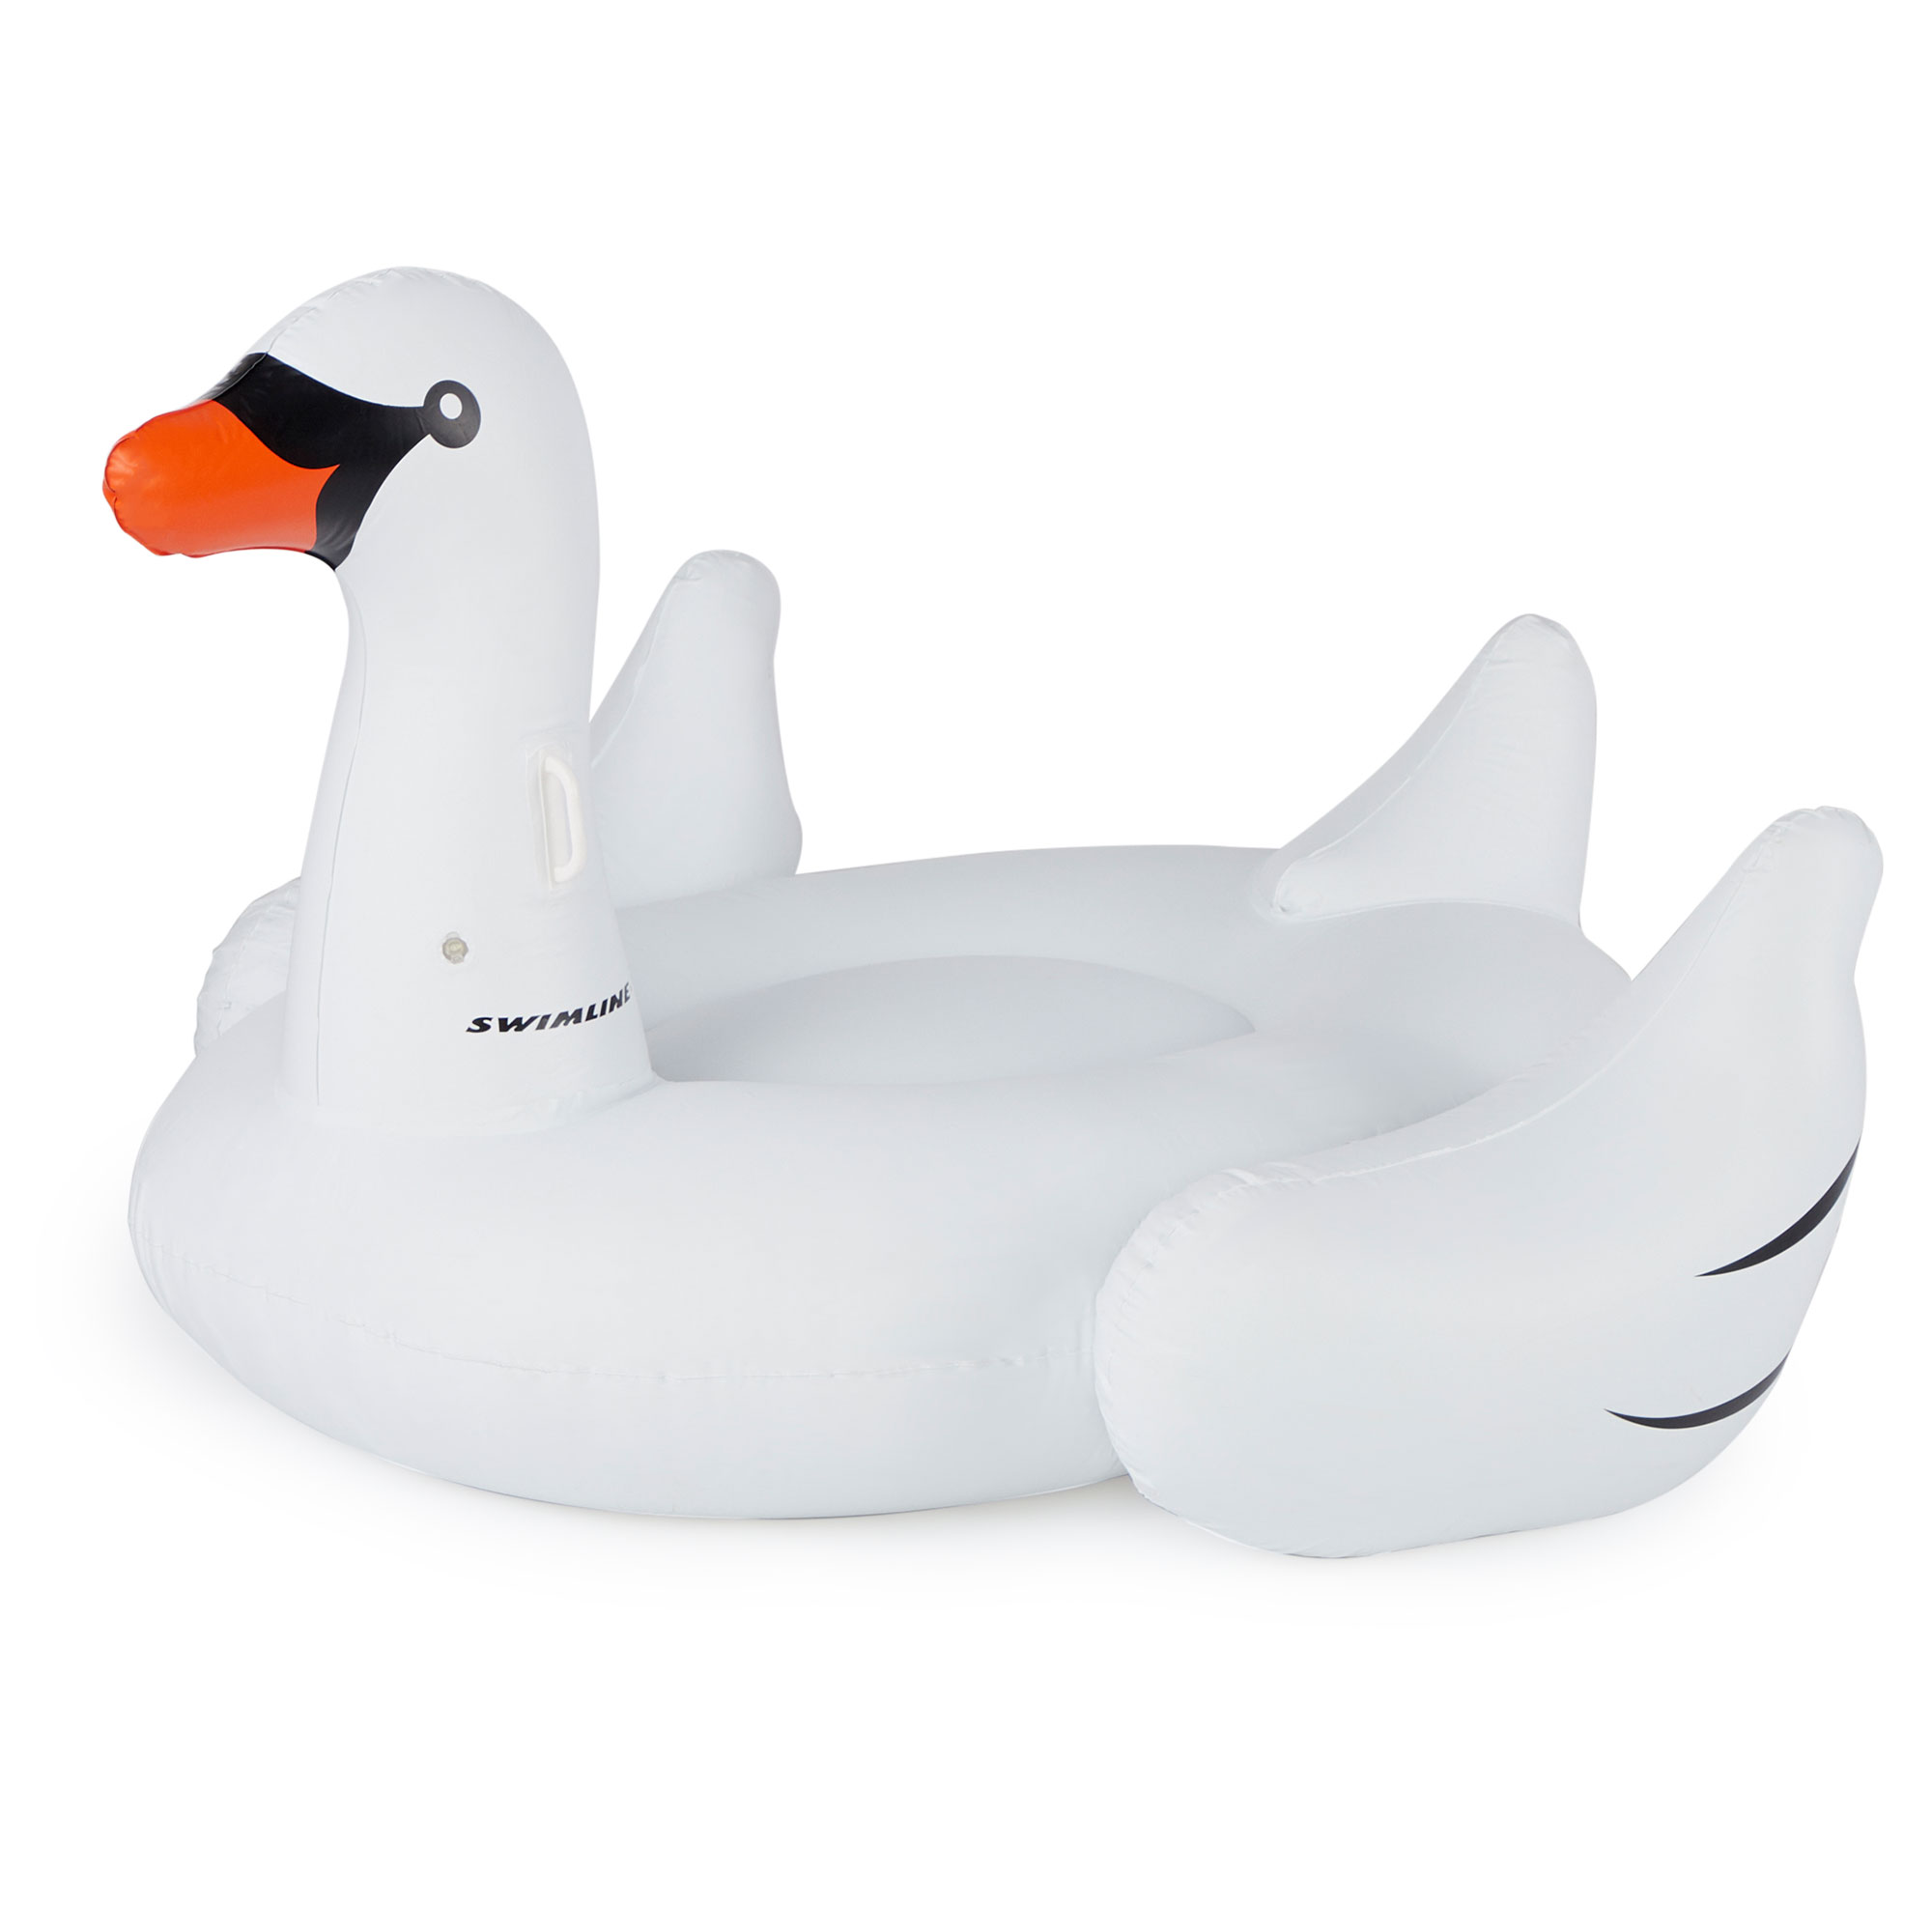 SWIMLINE ORIGINAL 90621 Giant Inflatable Swan Pool Float Floatie Ride-On Lounge W/ Stable Legs Wings Large Rideable Blow Up Summer Beach Swimming Party Lounge Big Raft Tube Decoration Toys Kids Adults - image 1 of 7